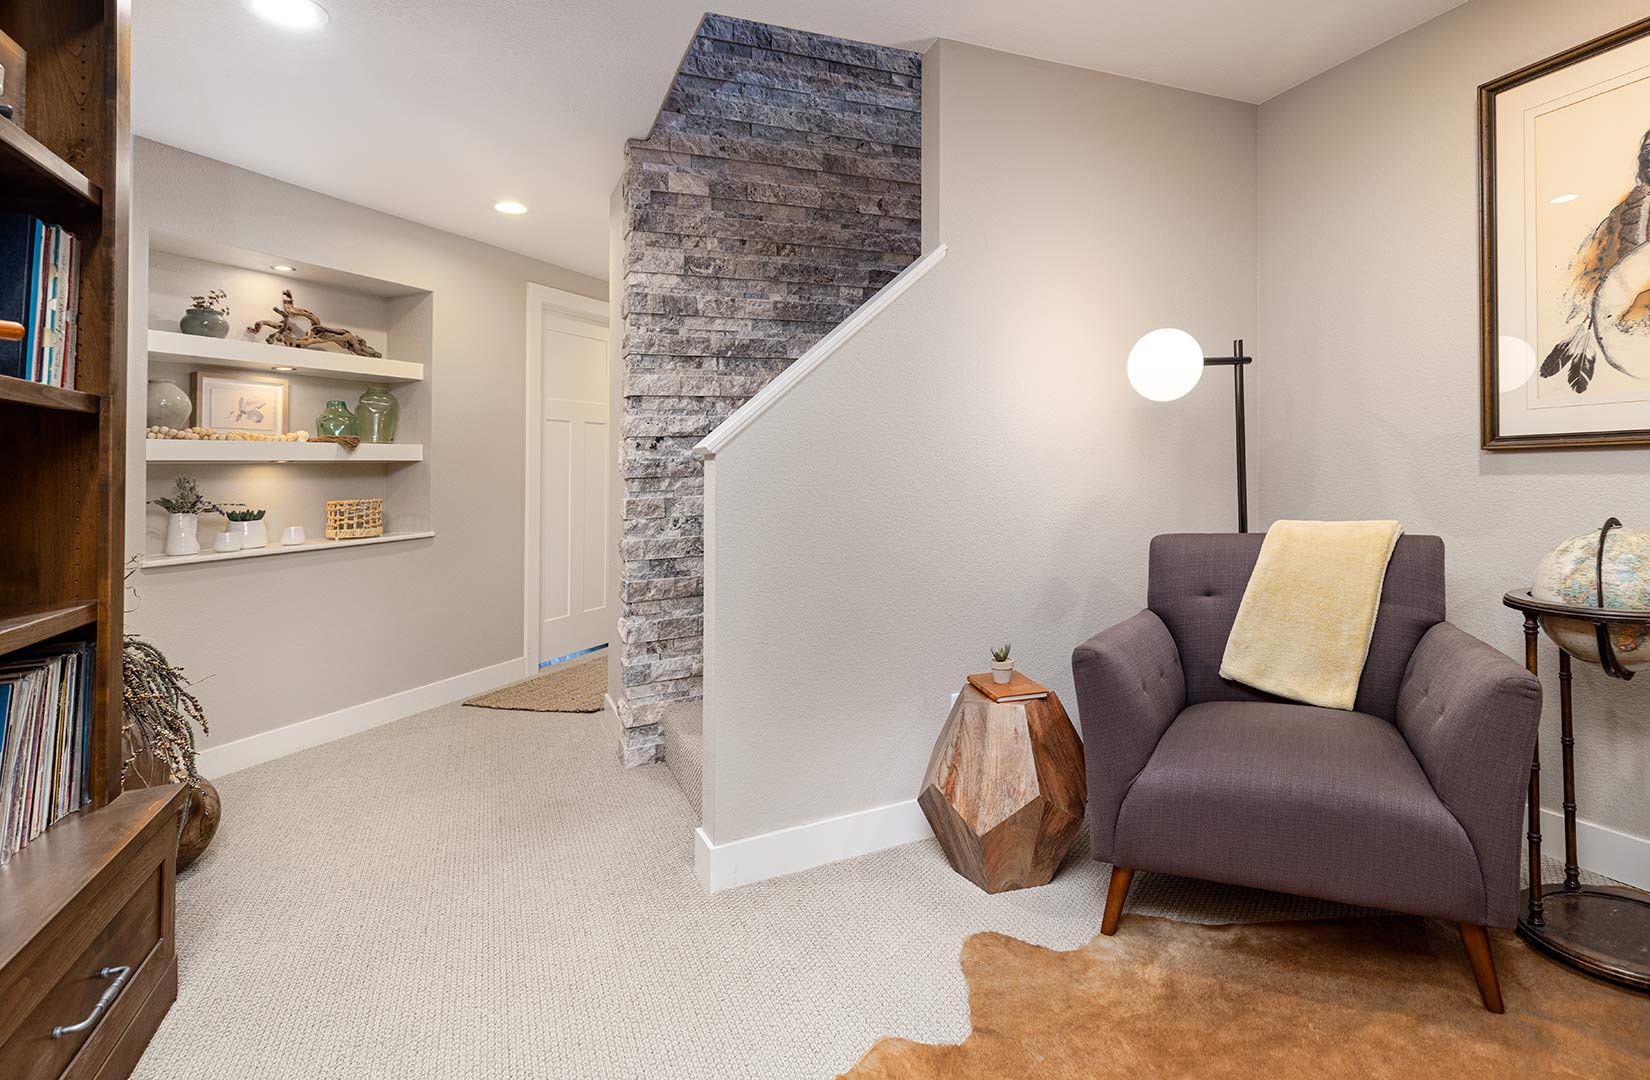 Downstairs library at the landing of the stairs shows a rock wall that scales the two stories of this renovated home